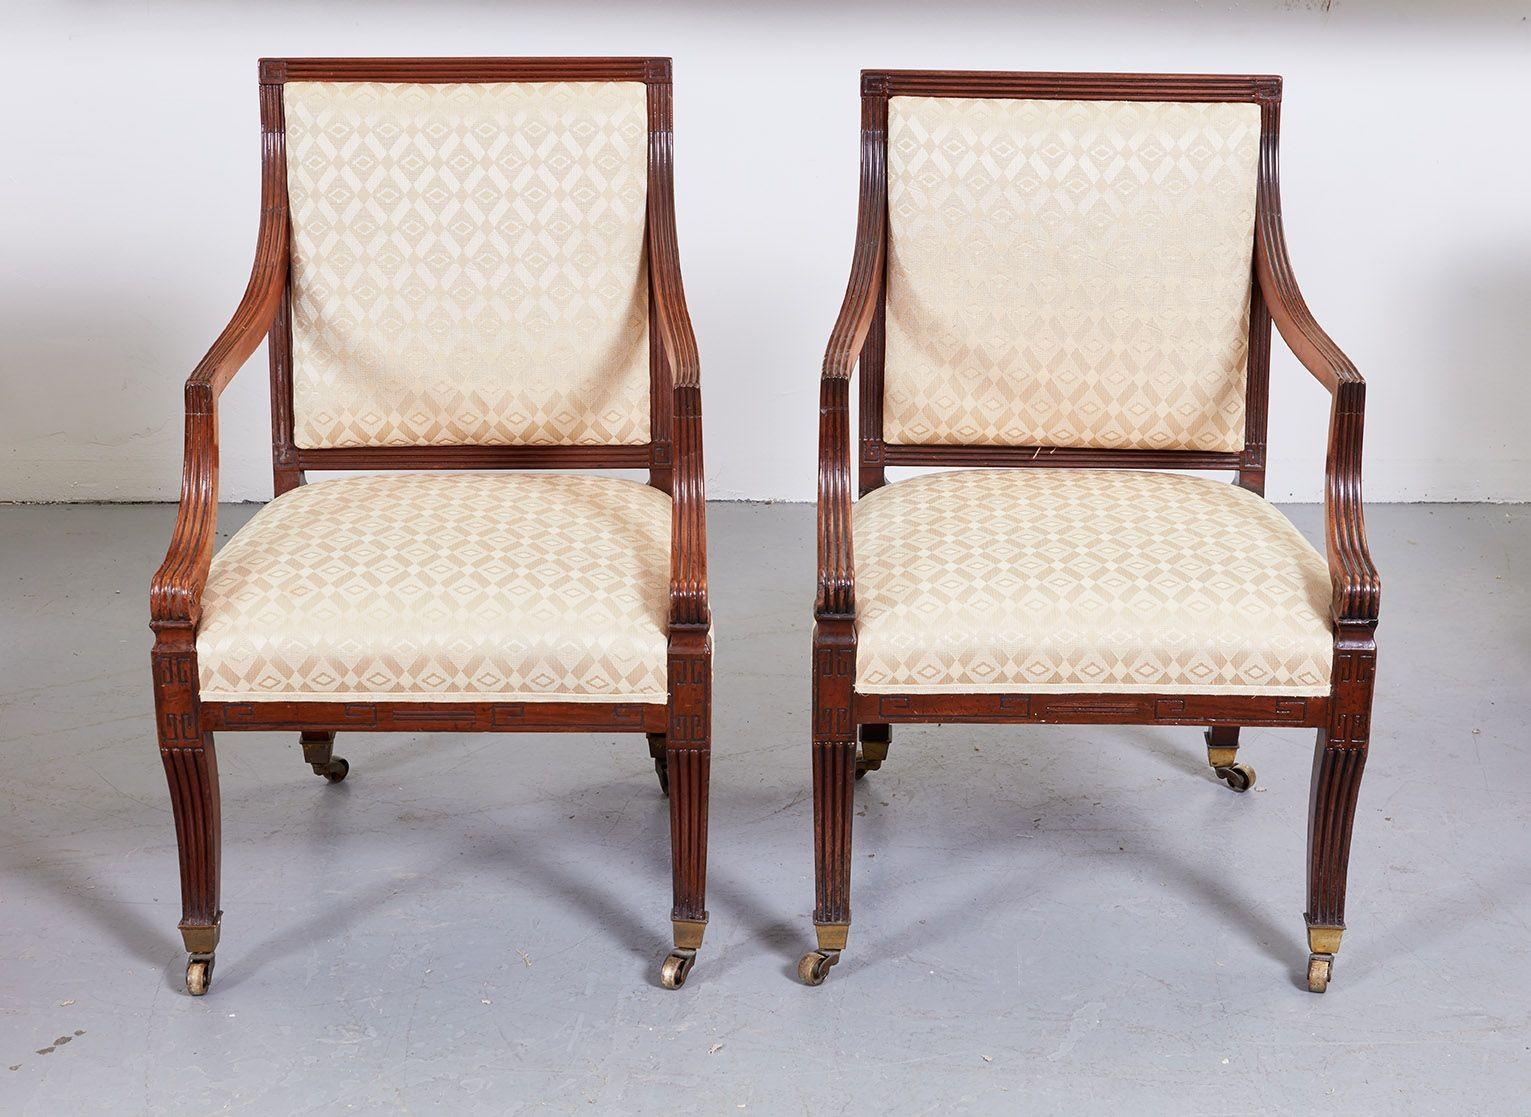 Fine pair of Regency period armchairs, the square backs with reeded crest ending in Greek key motif, the arms, back rails, seat frame and legs similarly treated, the latter having saber form ending in original box castors, ready for reupholstery.